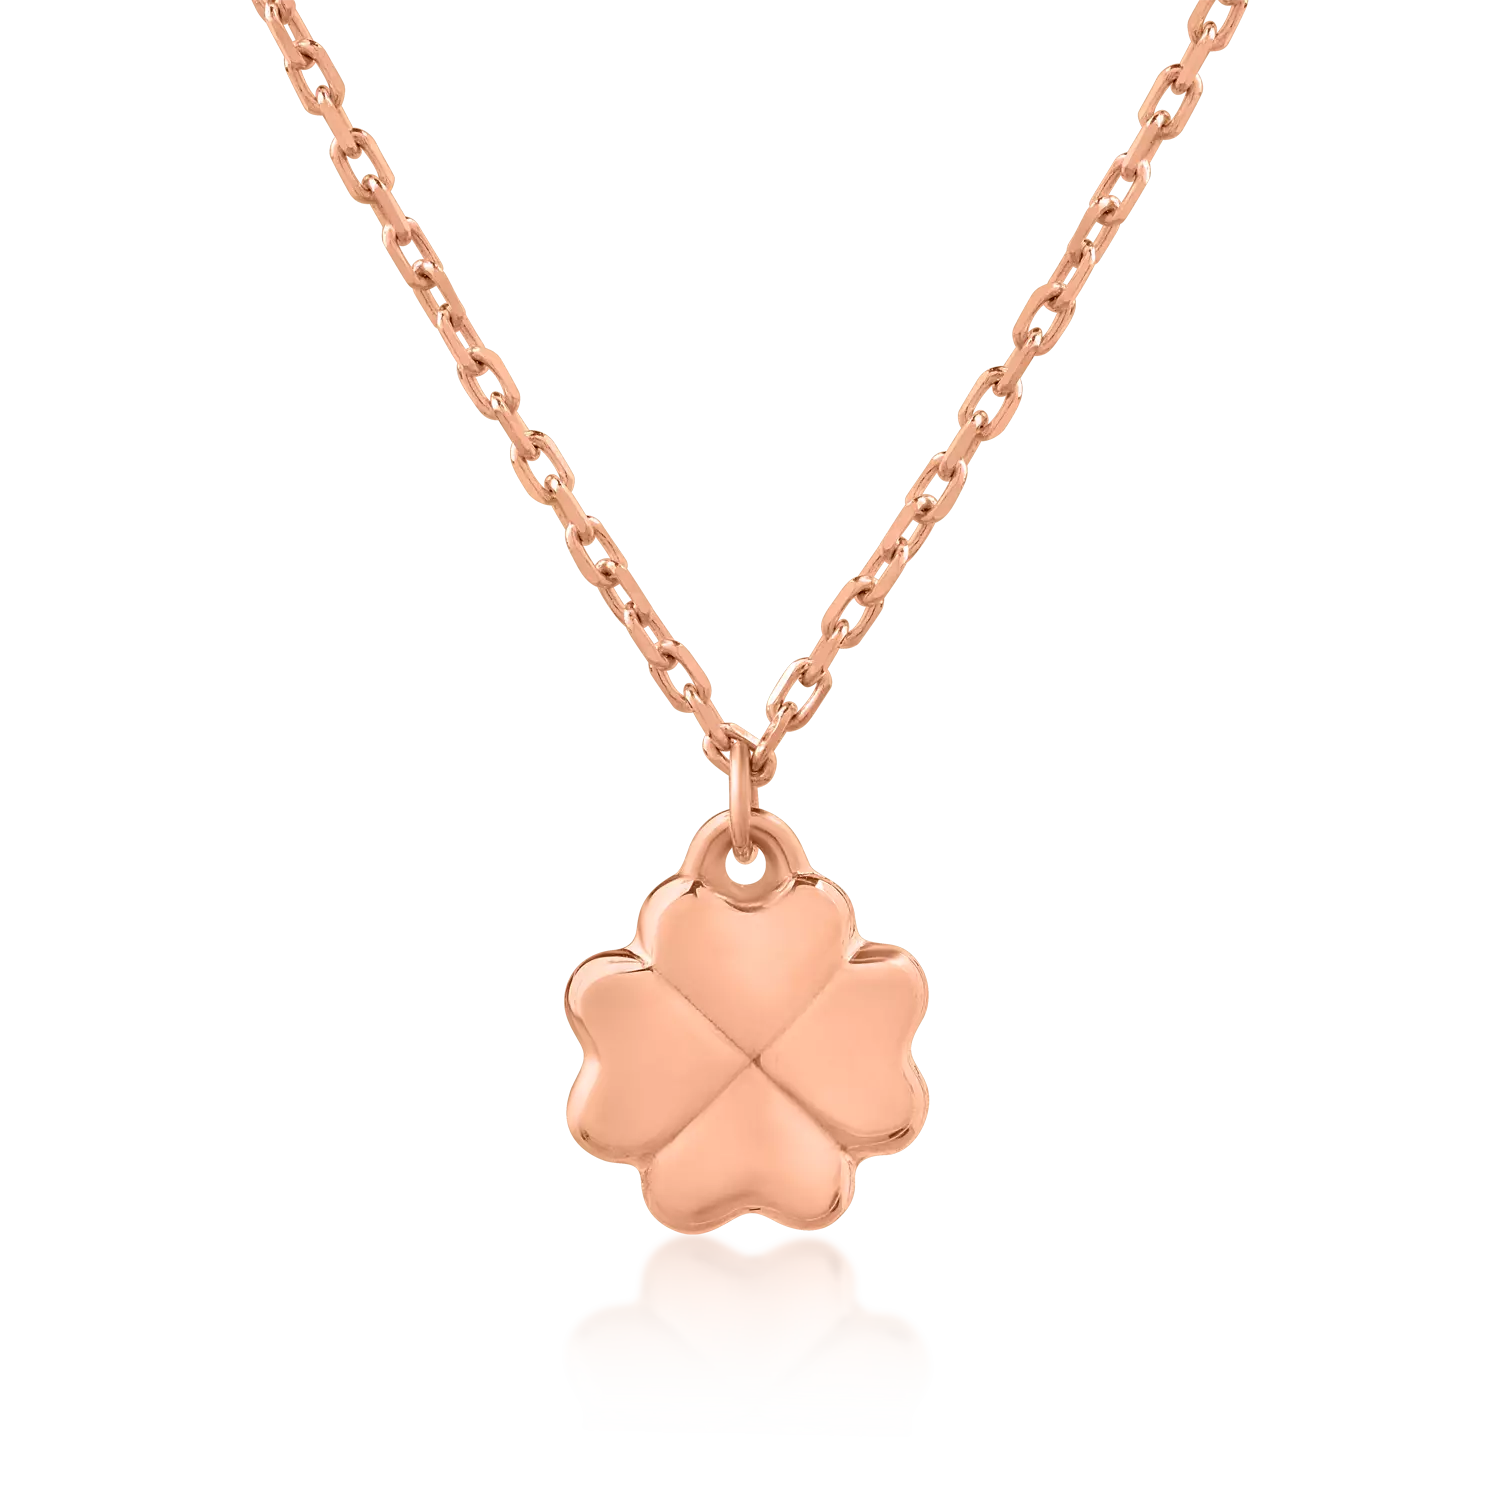 14K rose gold chain with clover pendant